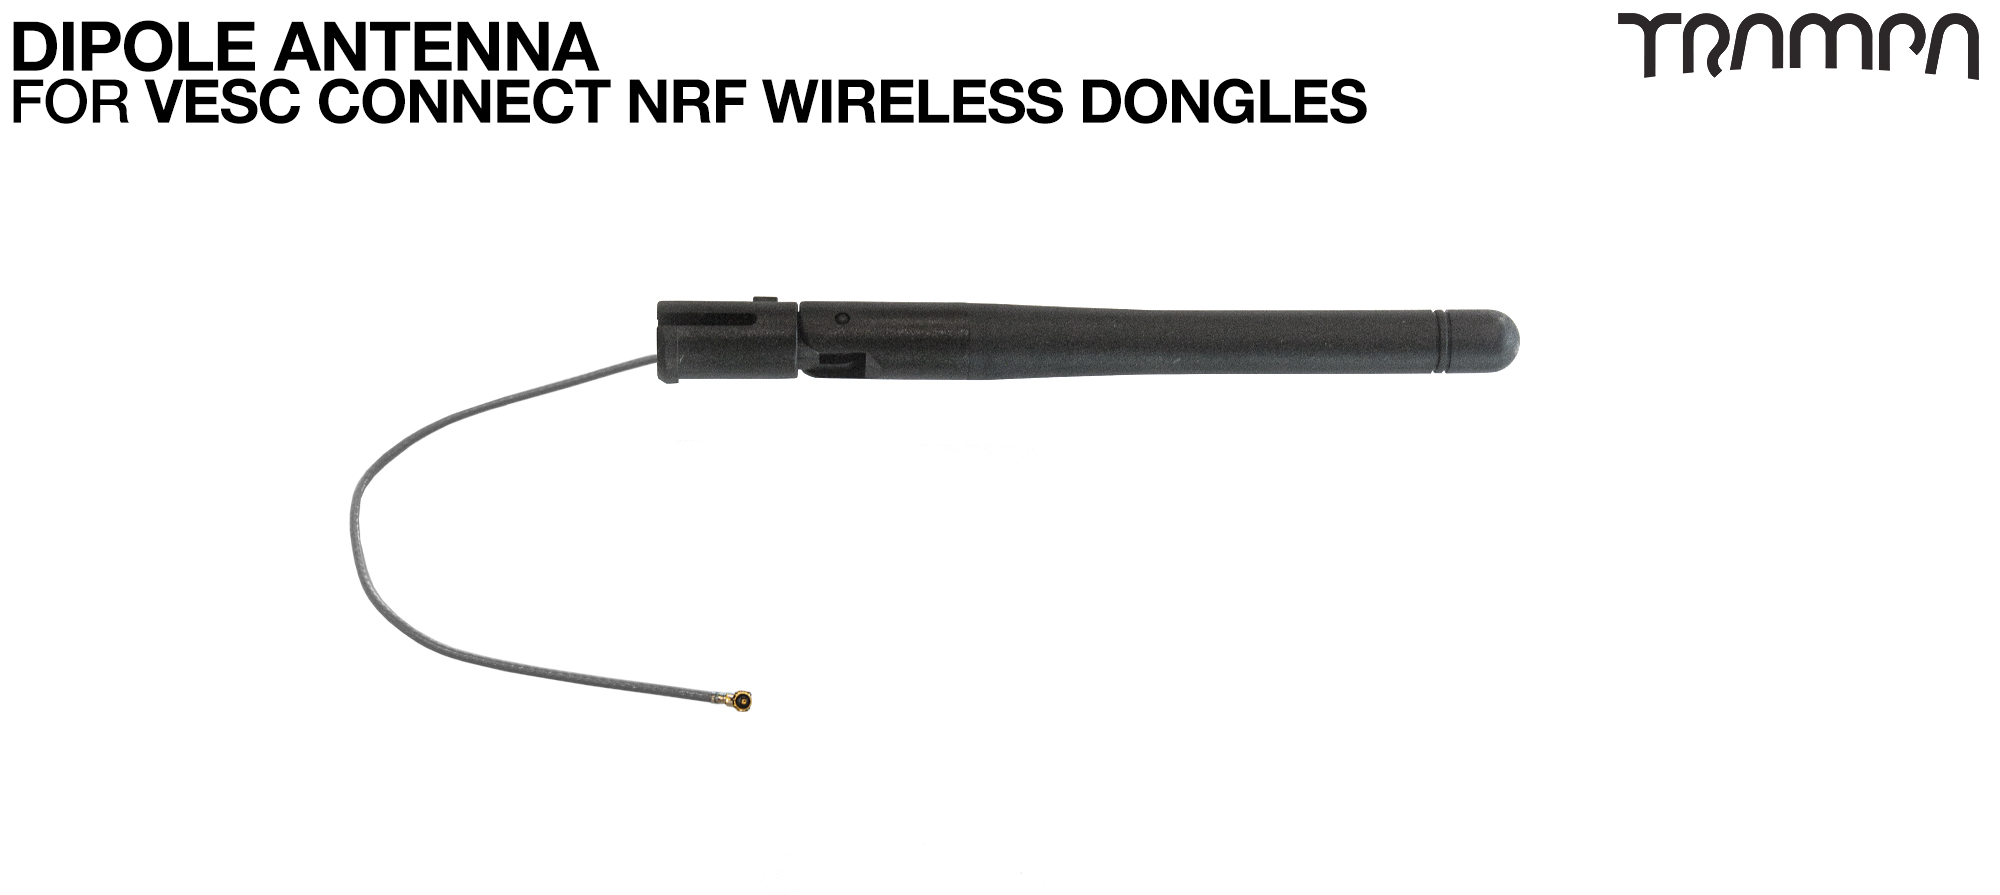 External Dipole Antenna for VESC Connect NRF Wireless Dongles